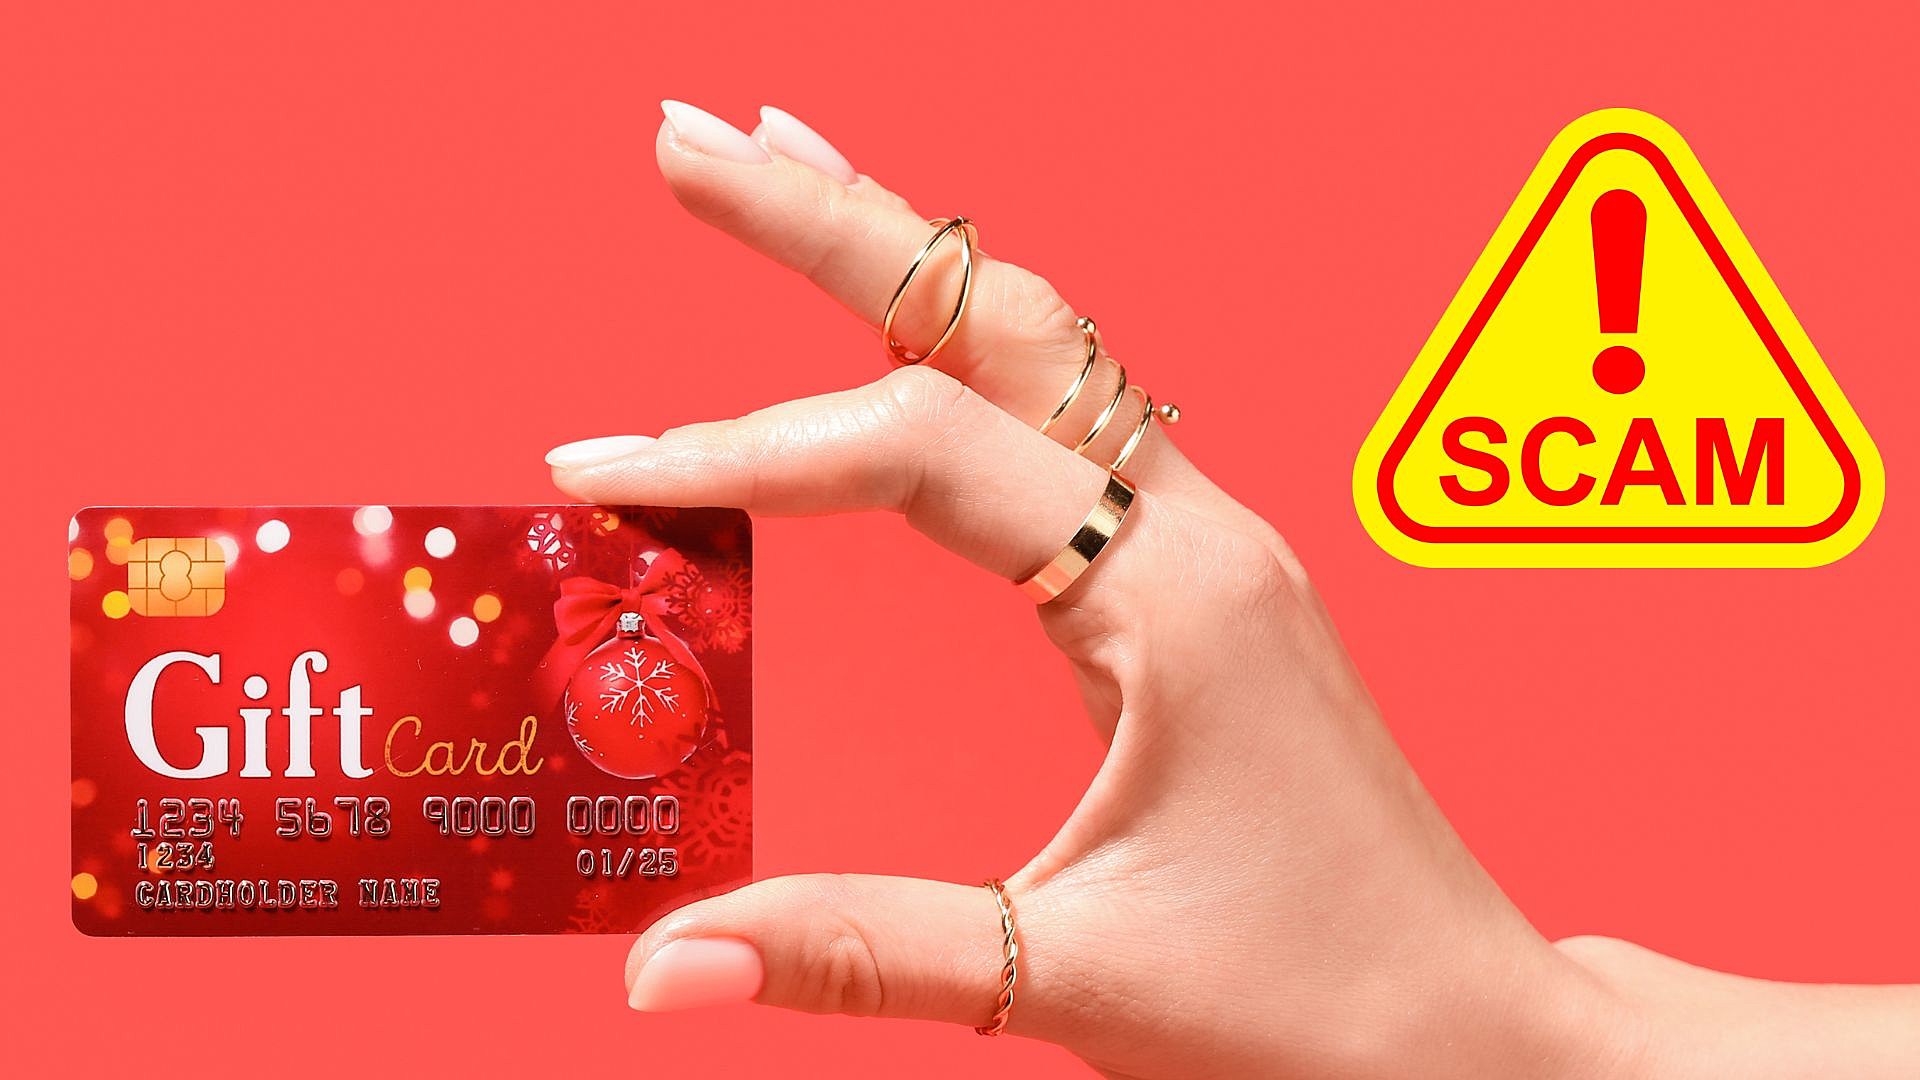 Corporate Gift Card And Services in Nagda, Ujjain - Jan Samadhan Technology  & Servicesprivate Limited